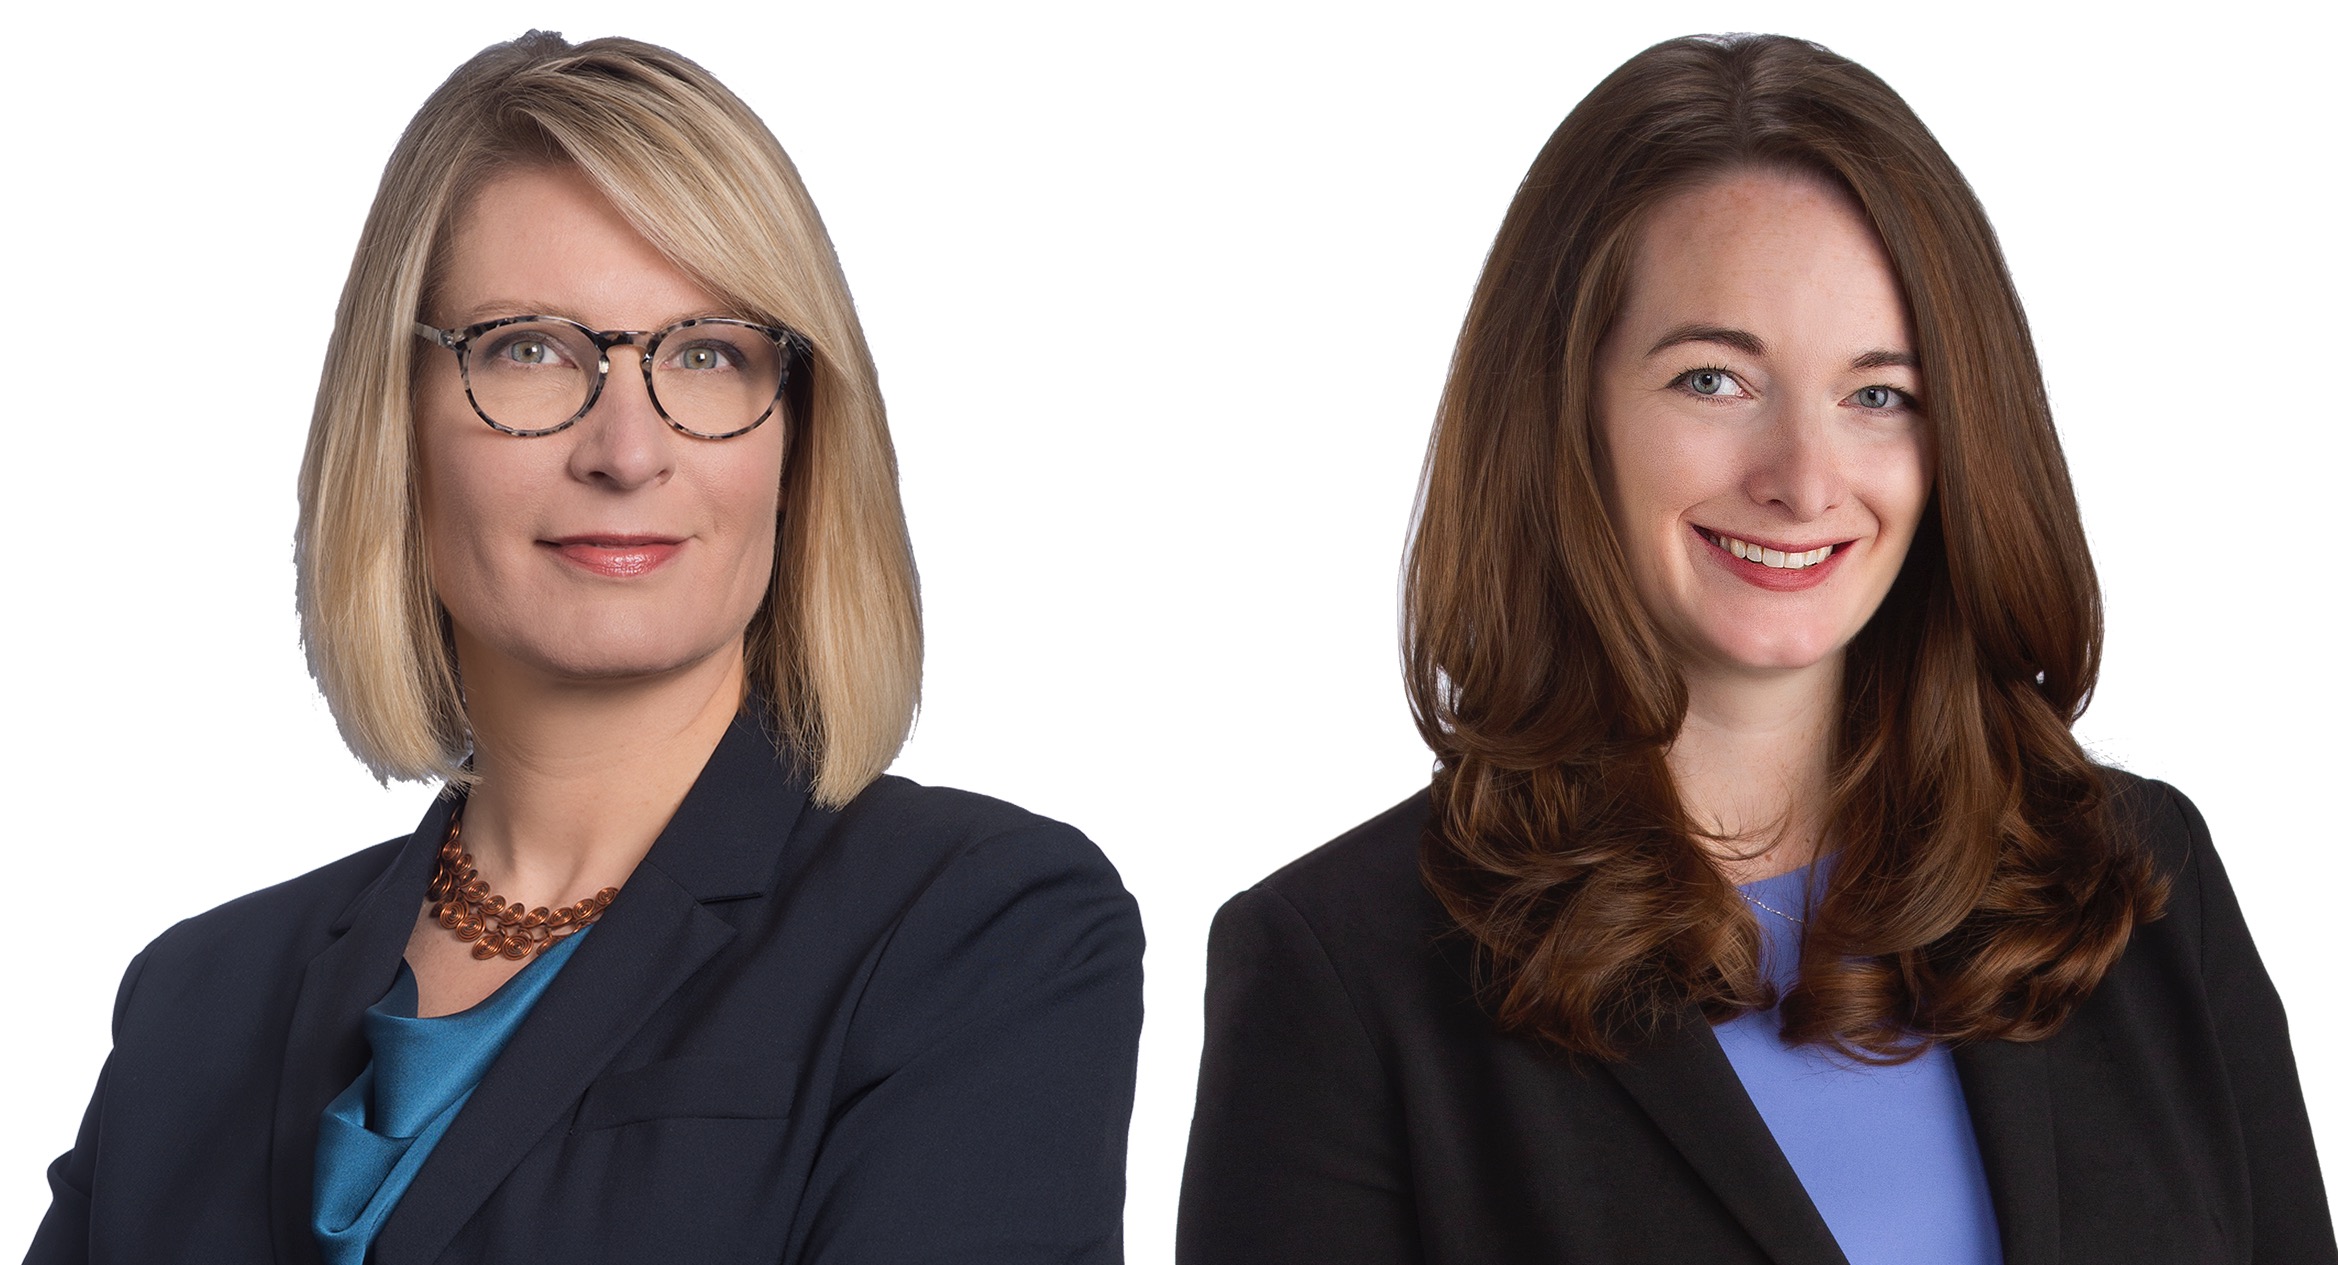 Anne D. Cartwright and Mary Deweese are attorneys in Husch Blackwell LLP's Kansas City office and Chicago office, respectively.